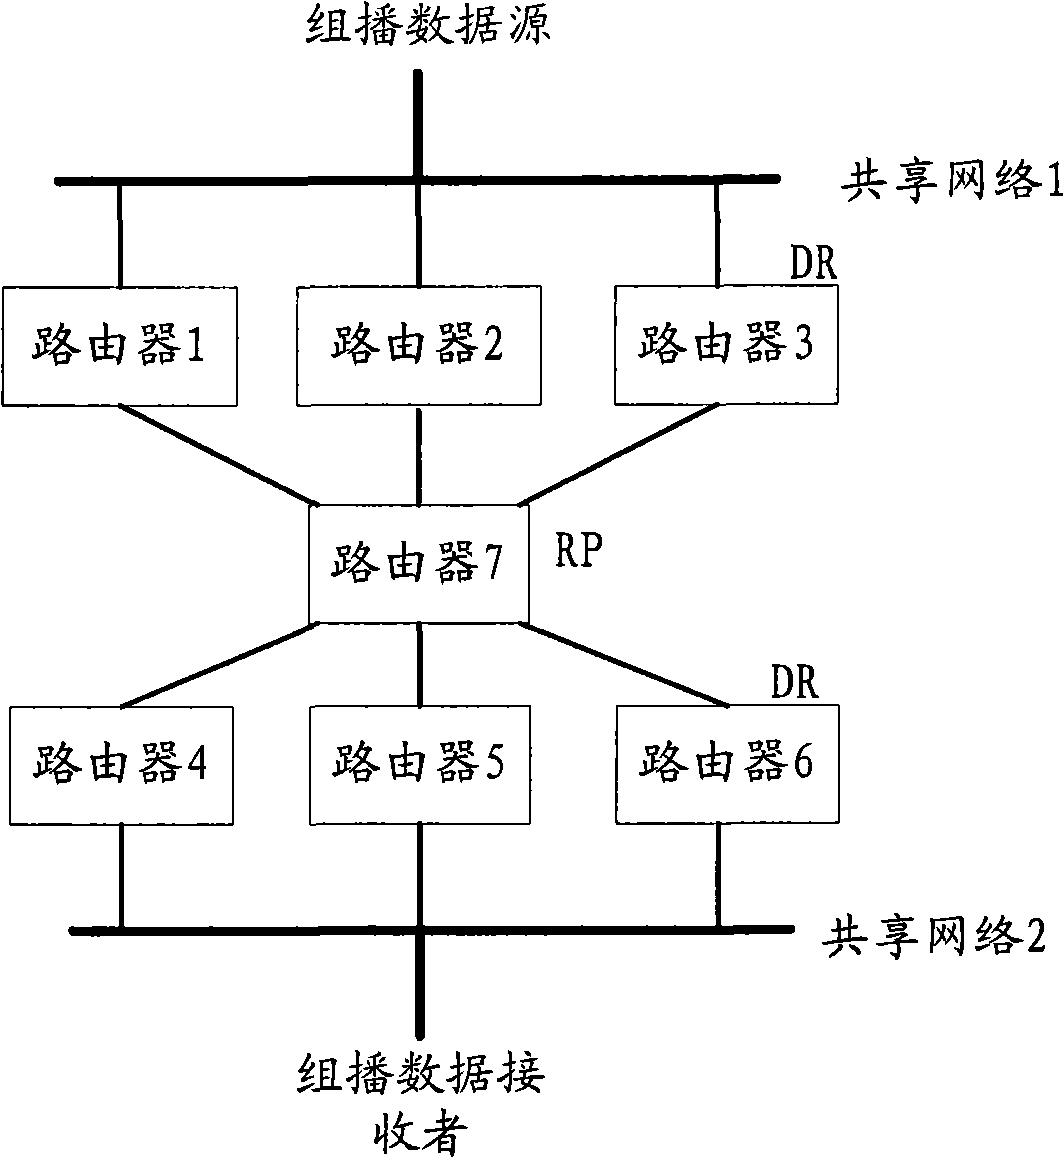 Load balancing method for multicast data stream, route equipment and network system